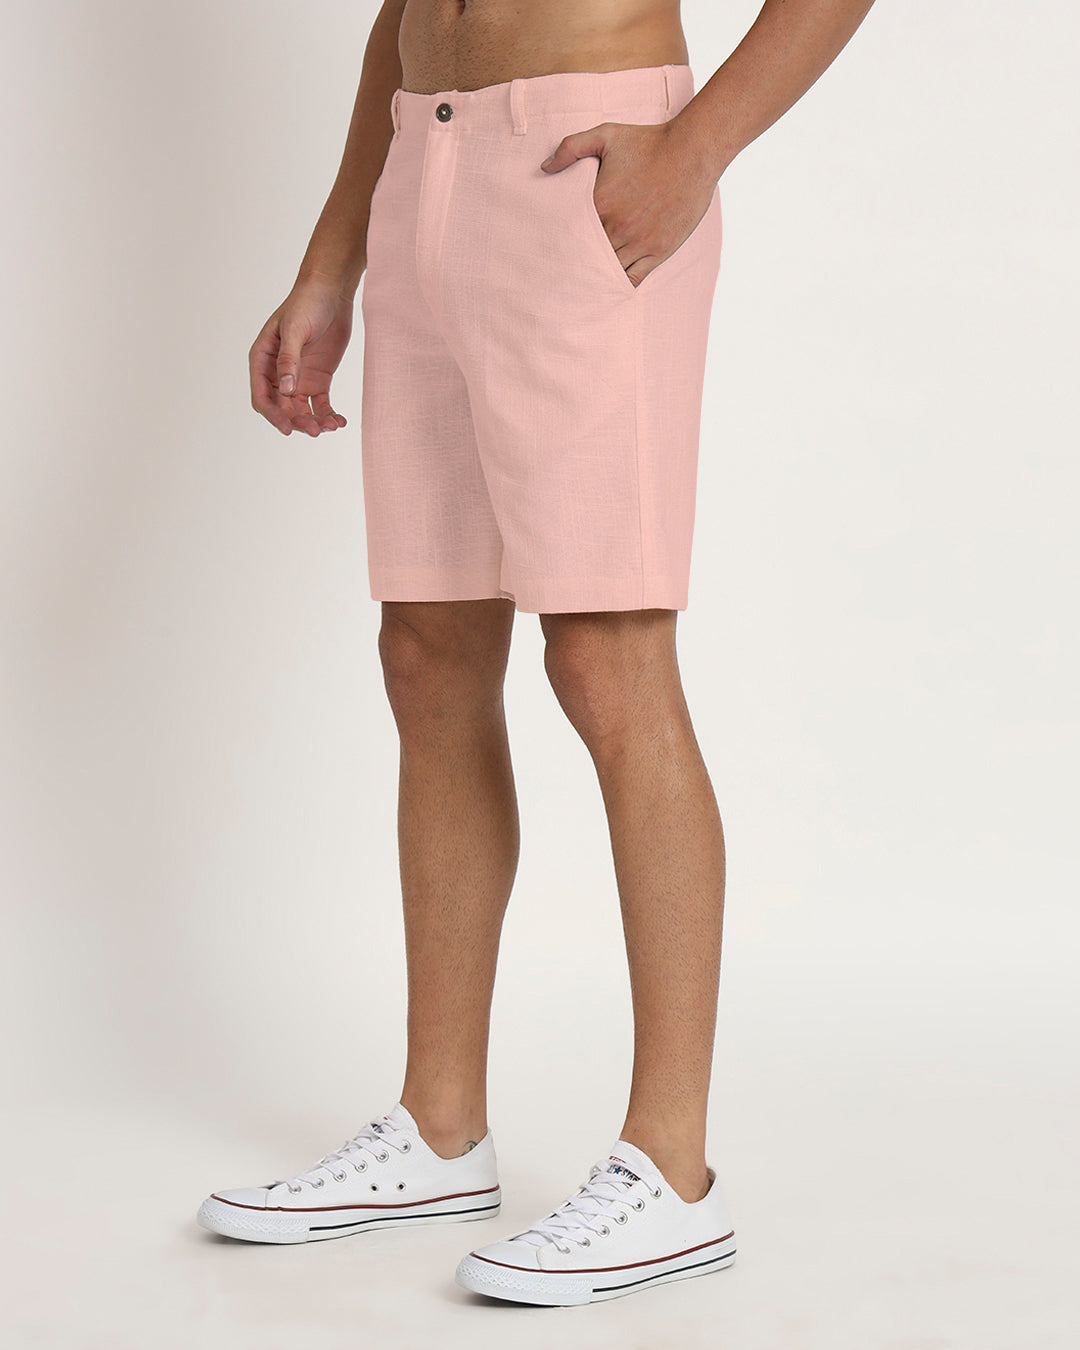 Combo : Ready For Anything Black & Fondant Pink Men's Shorts